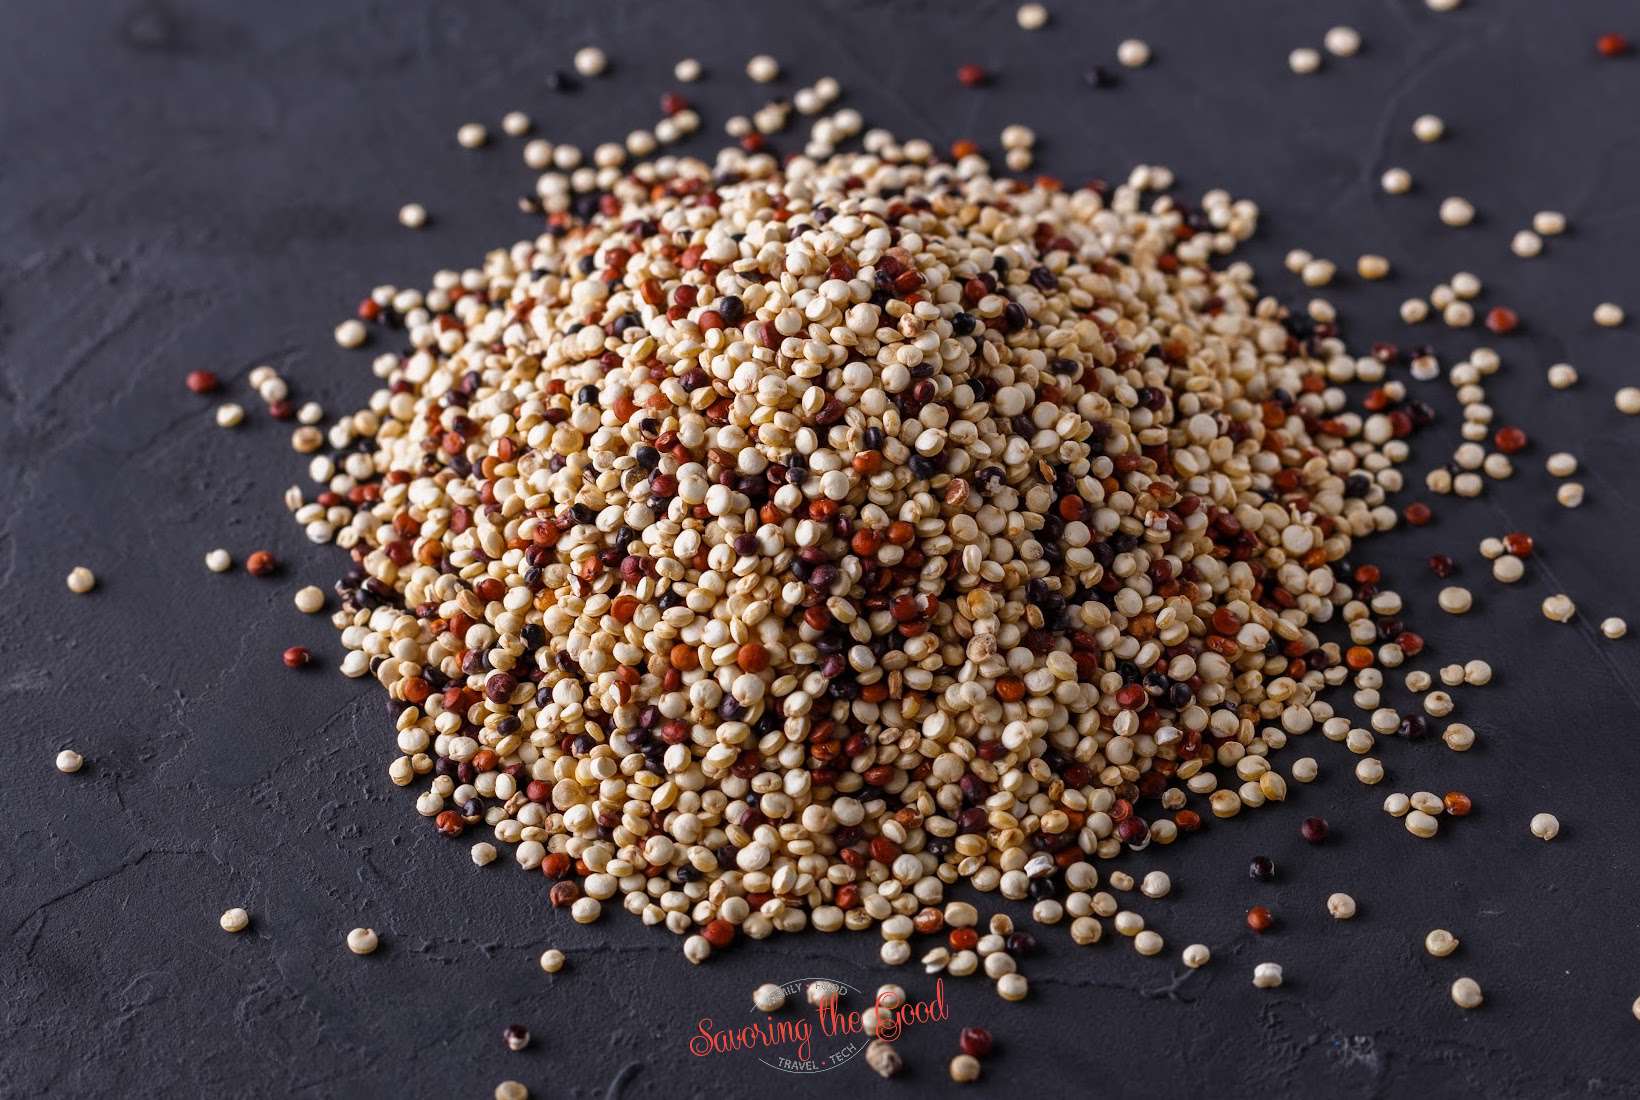 A pile of quinoa on a dark surface.